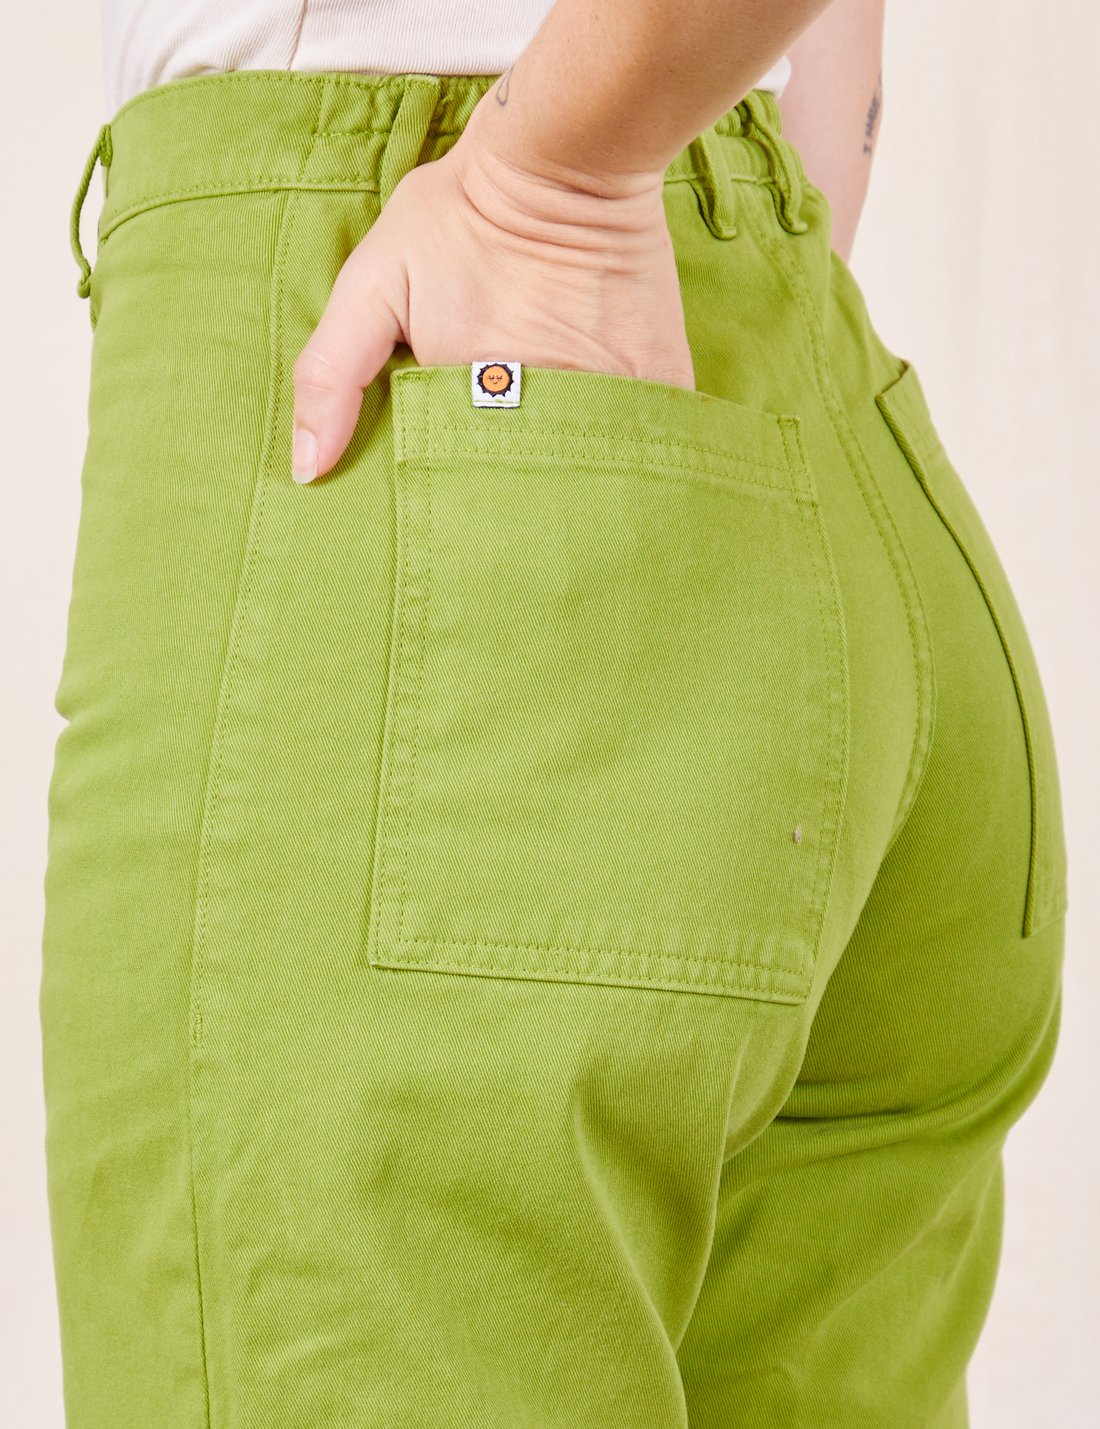 Western Pants in Gross Green back pocket close up on Alex